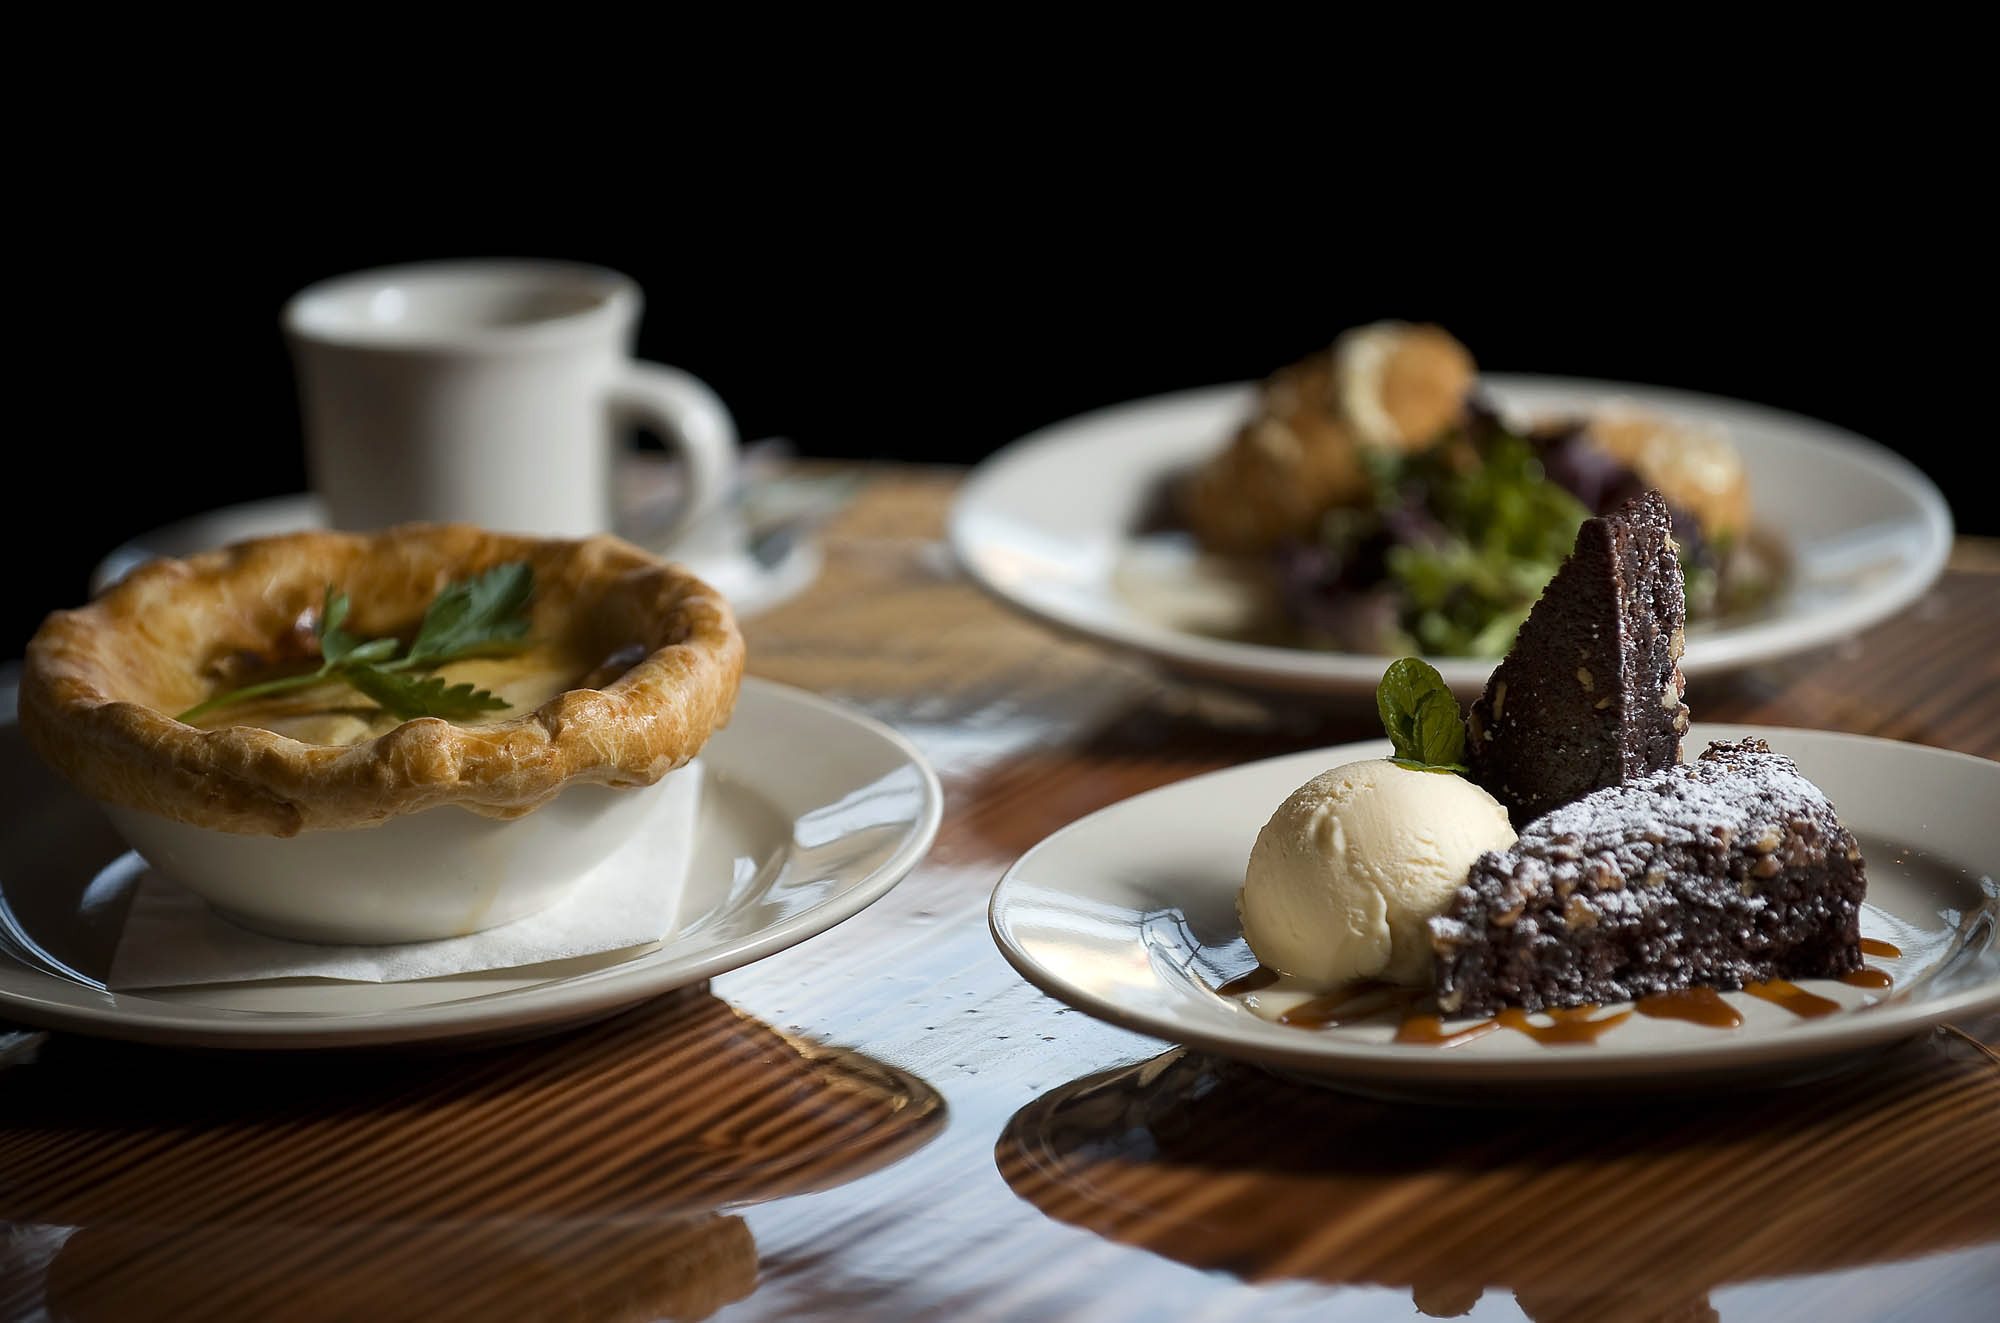 The Pecan Praline Brownie, clockwise from right, Chicken Pot Pie and Crab Cakes are menu highlights at the Mill Creek Pub in Battle Ground.